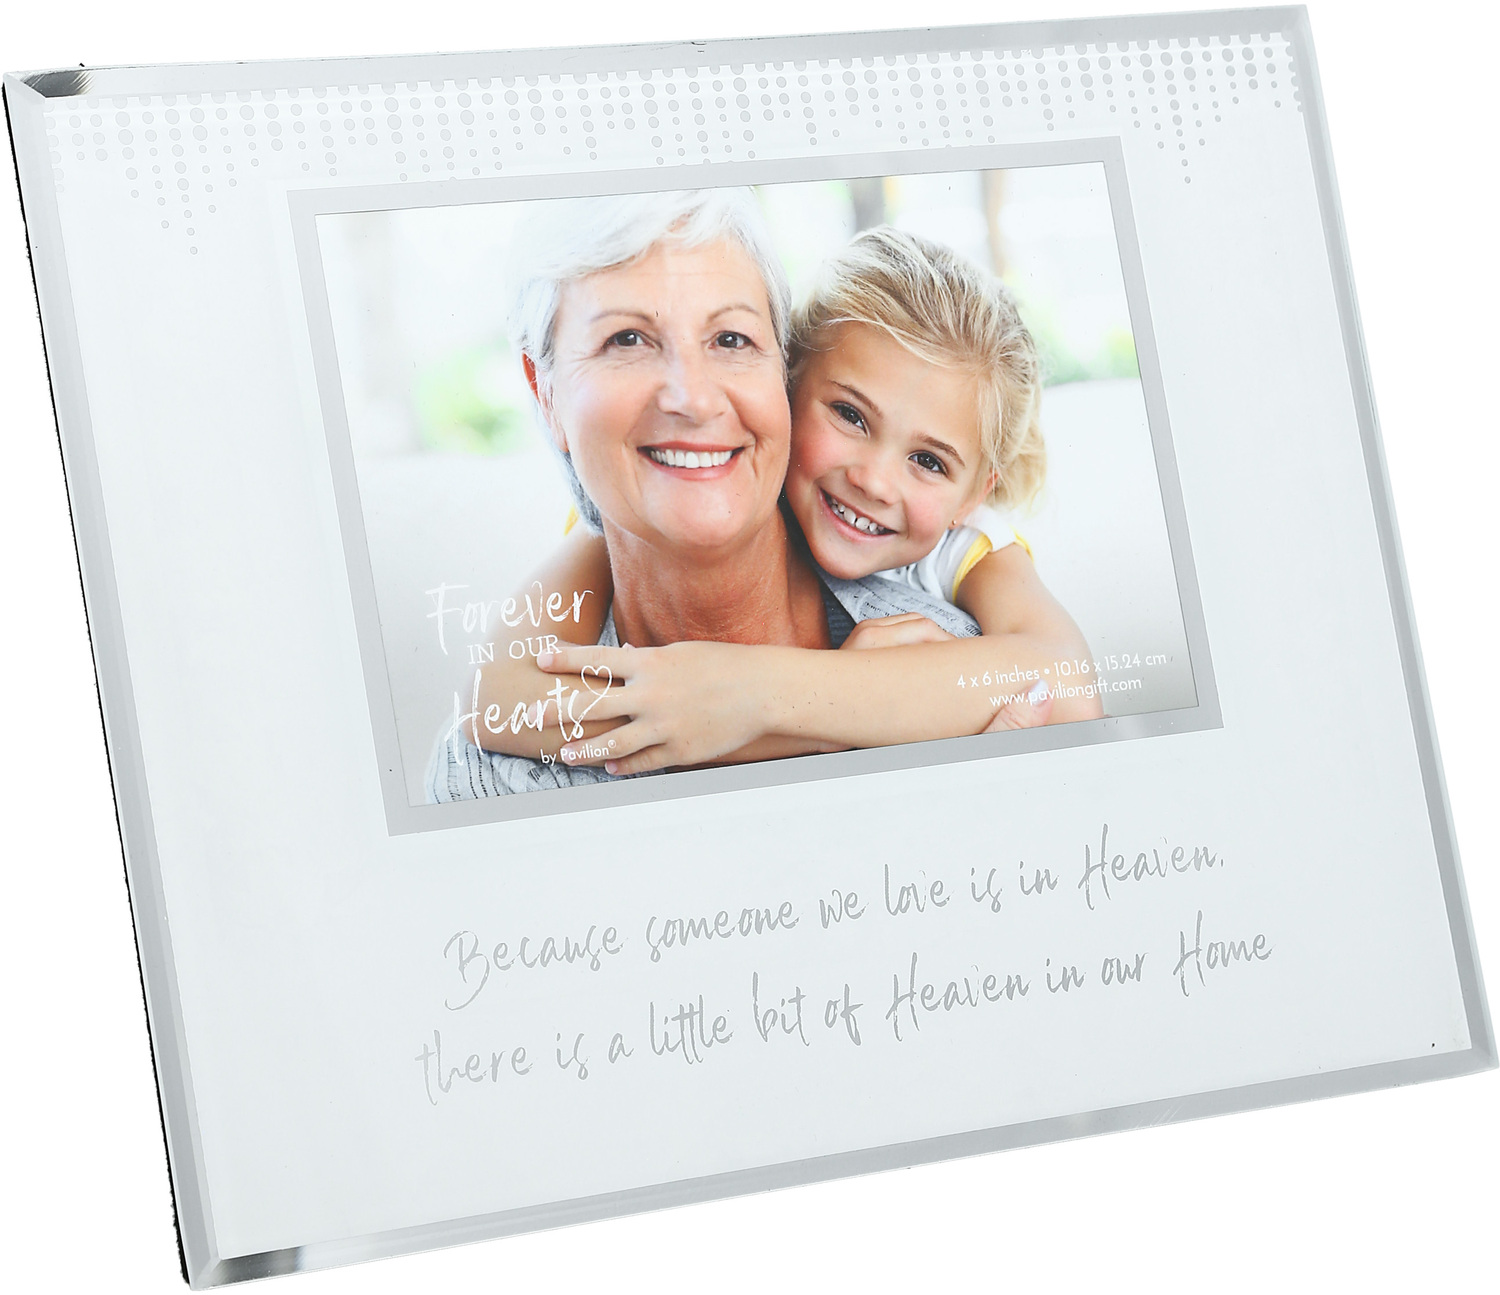 Heaven by Forever in our Hearts - Heaven - 9.25" x 7.25" Frame
(Holds 6" x 4" Photo)